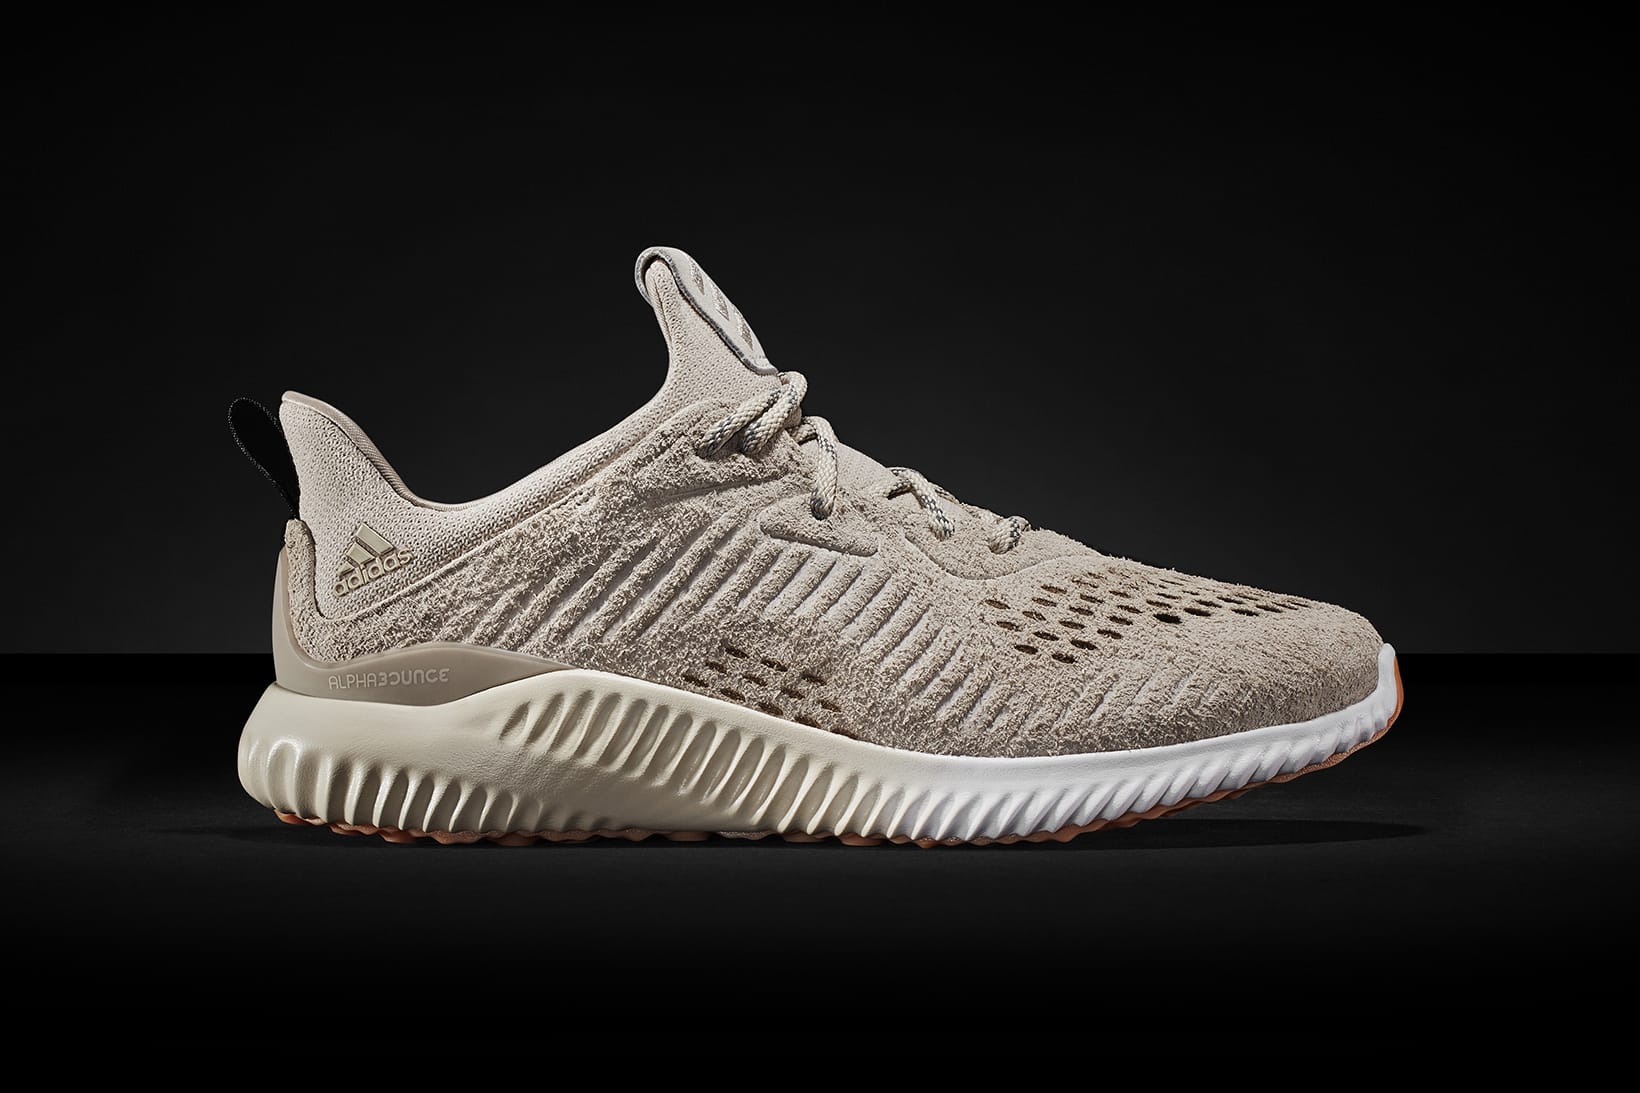 adidas AlphaBOUNCE Now in a Luxe Suede 